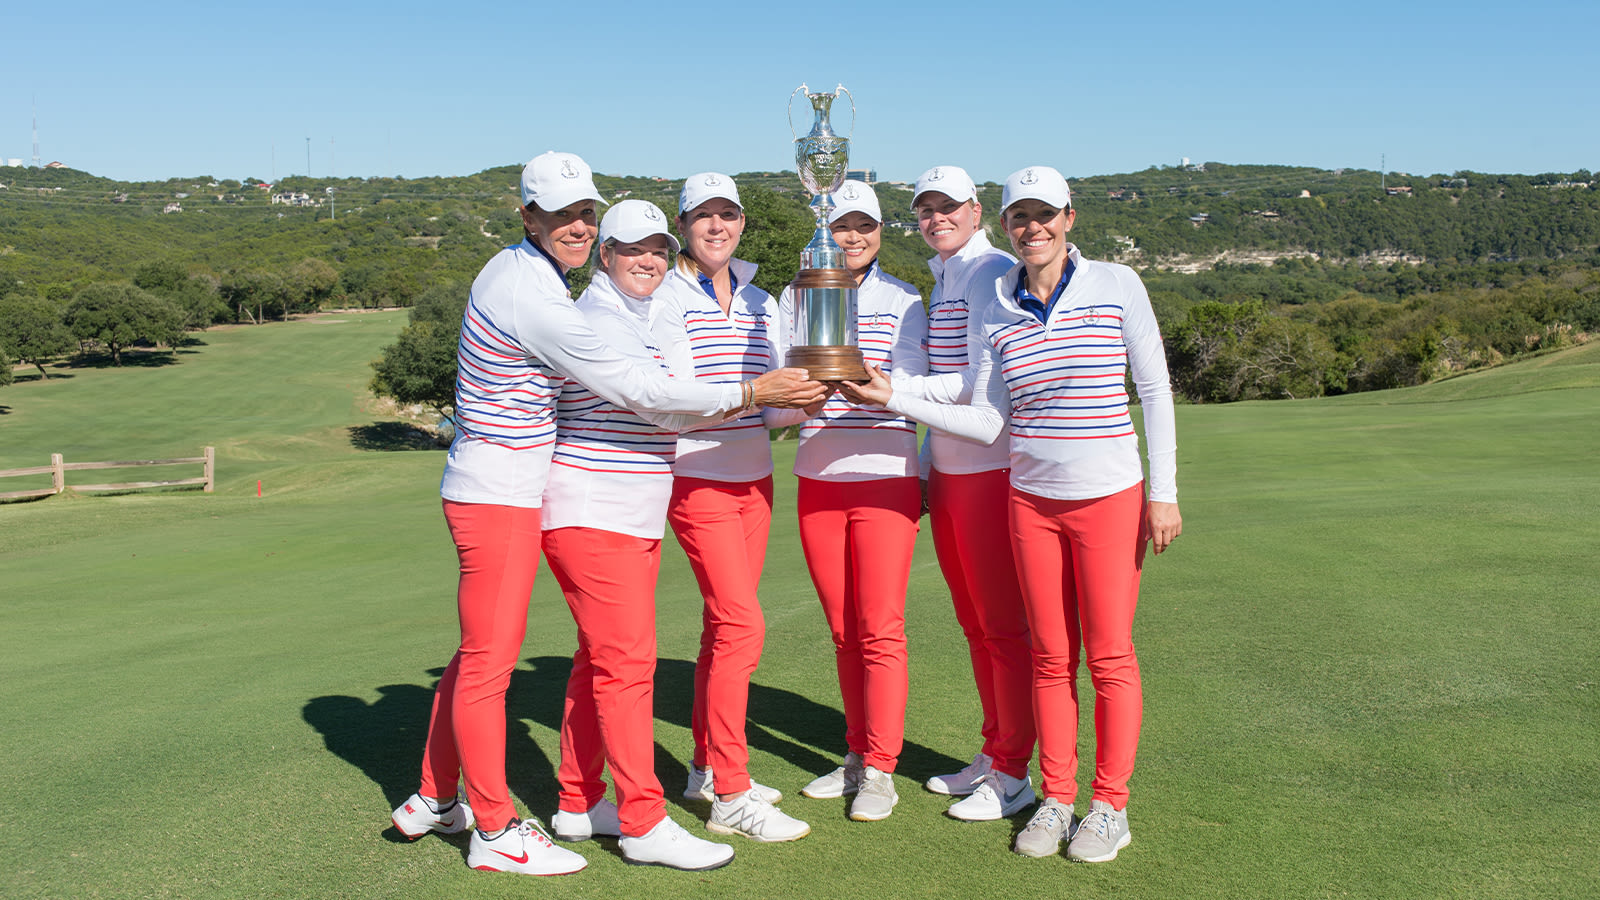 The United States team poses for a photo after the final round for the 2019 Women's PGA Cup held at the Omni Barton Creek Resort & Spa on October 26, 2019 in Austin, Texas. (Photo by Hailey Garrett/PGA of America)